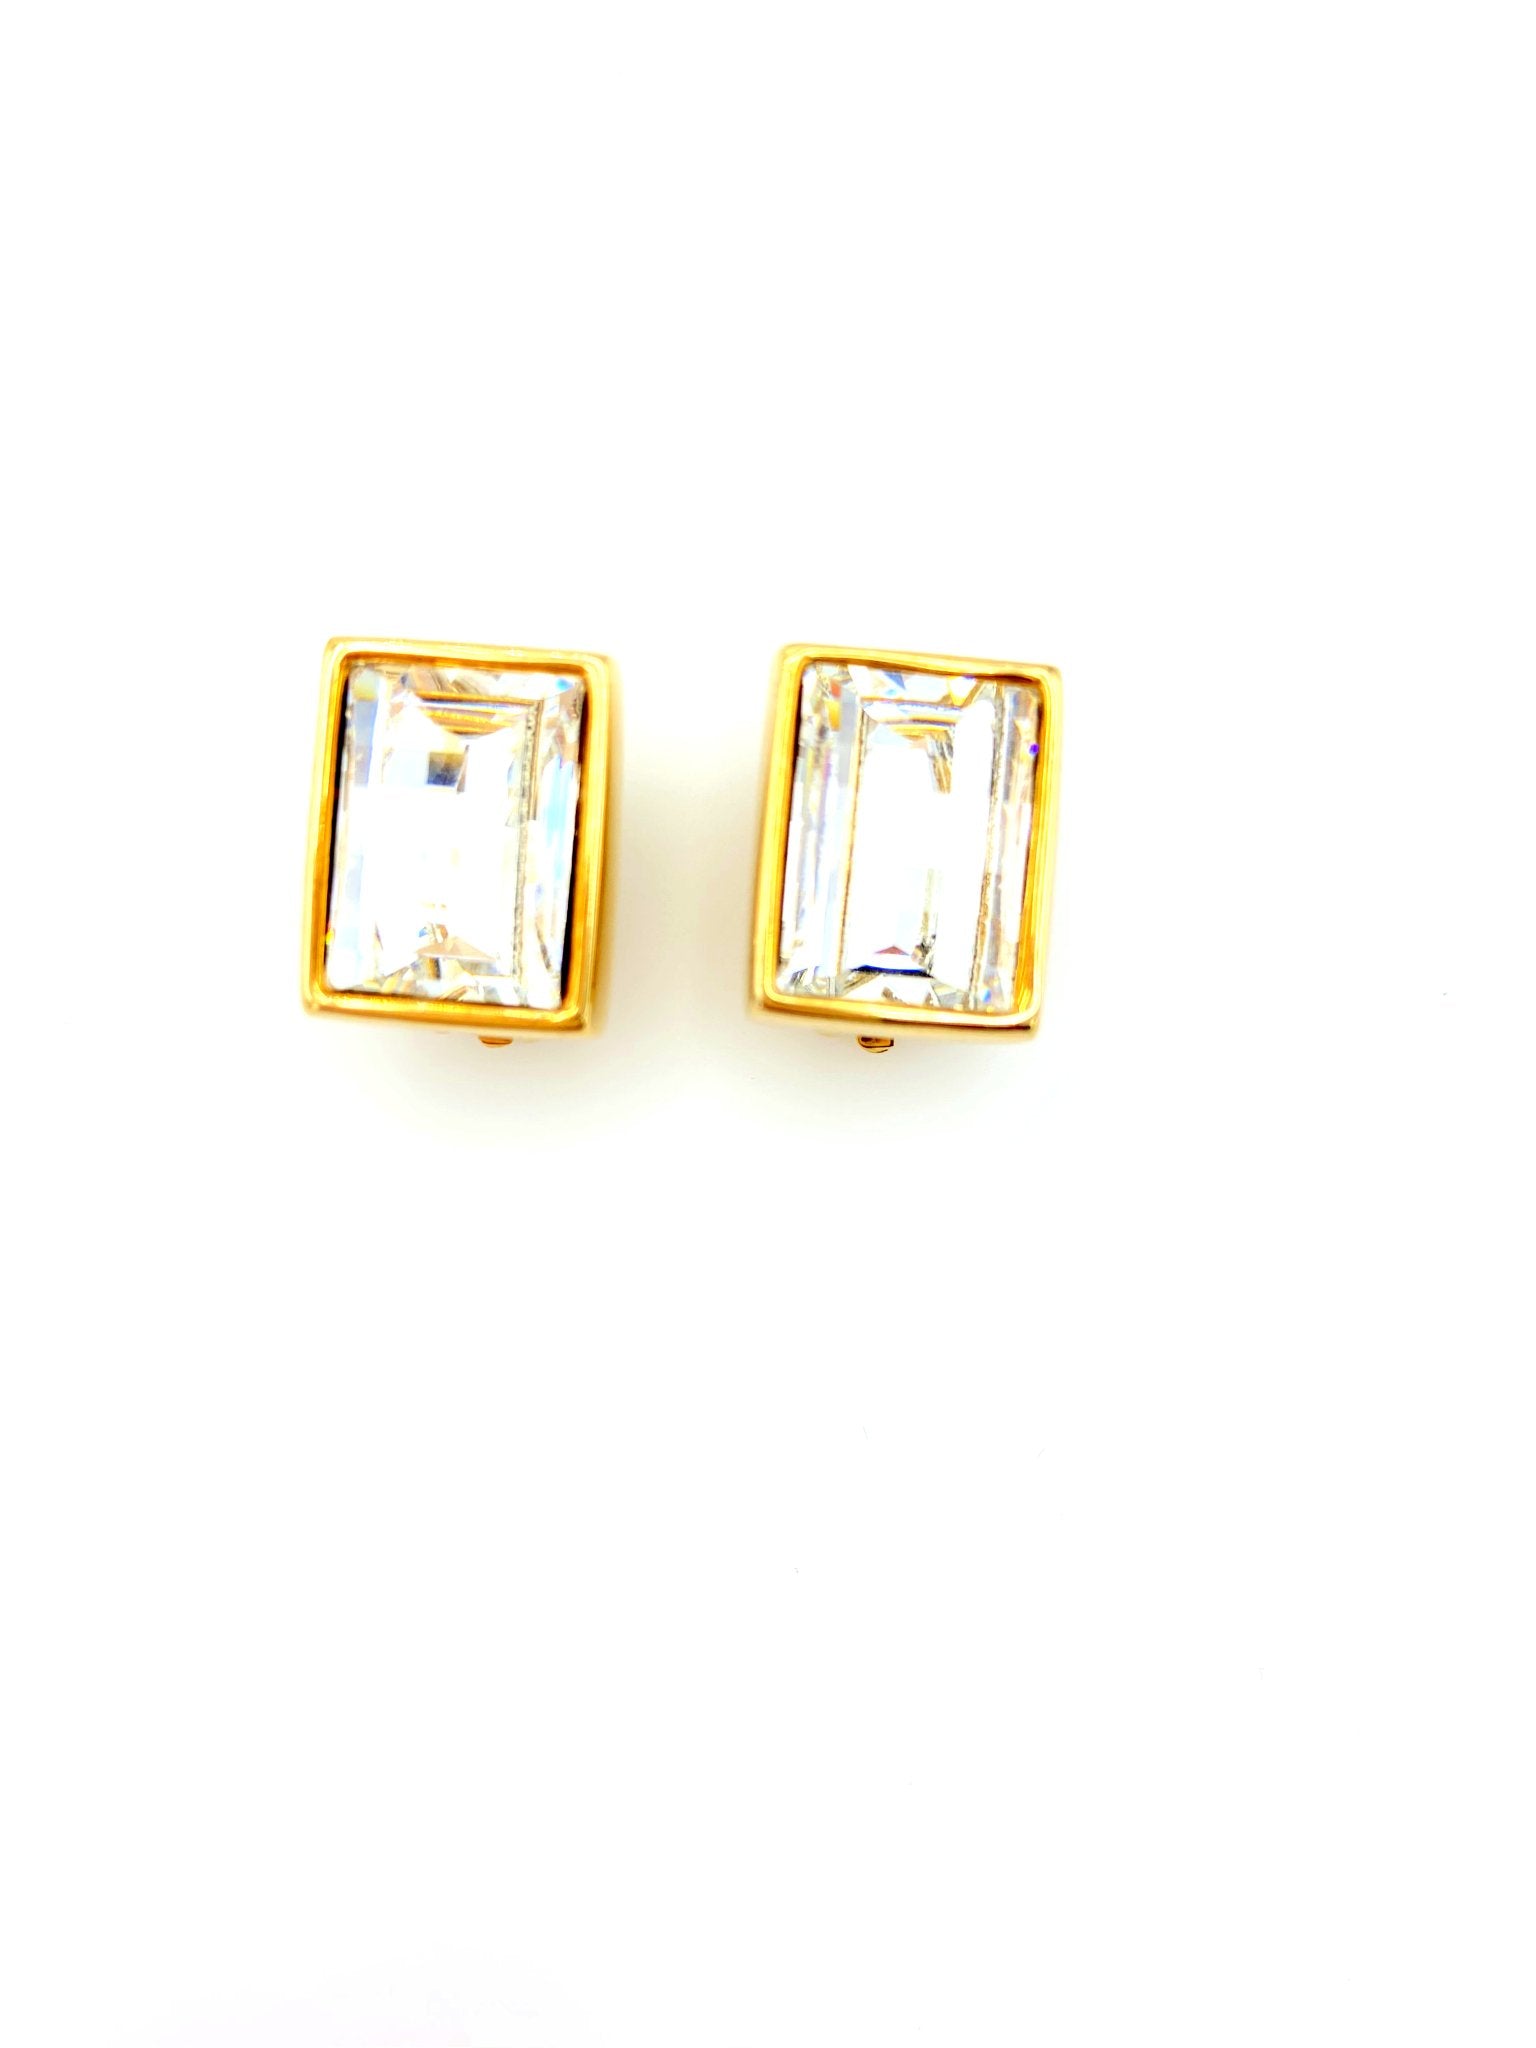 Shop ABF in Gold Classic Merigold Swarovski Earrings by ESME CRYSTALS at  House of Designers – HOUSE OF DESIGNERS